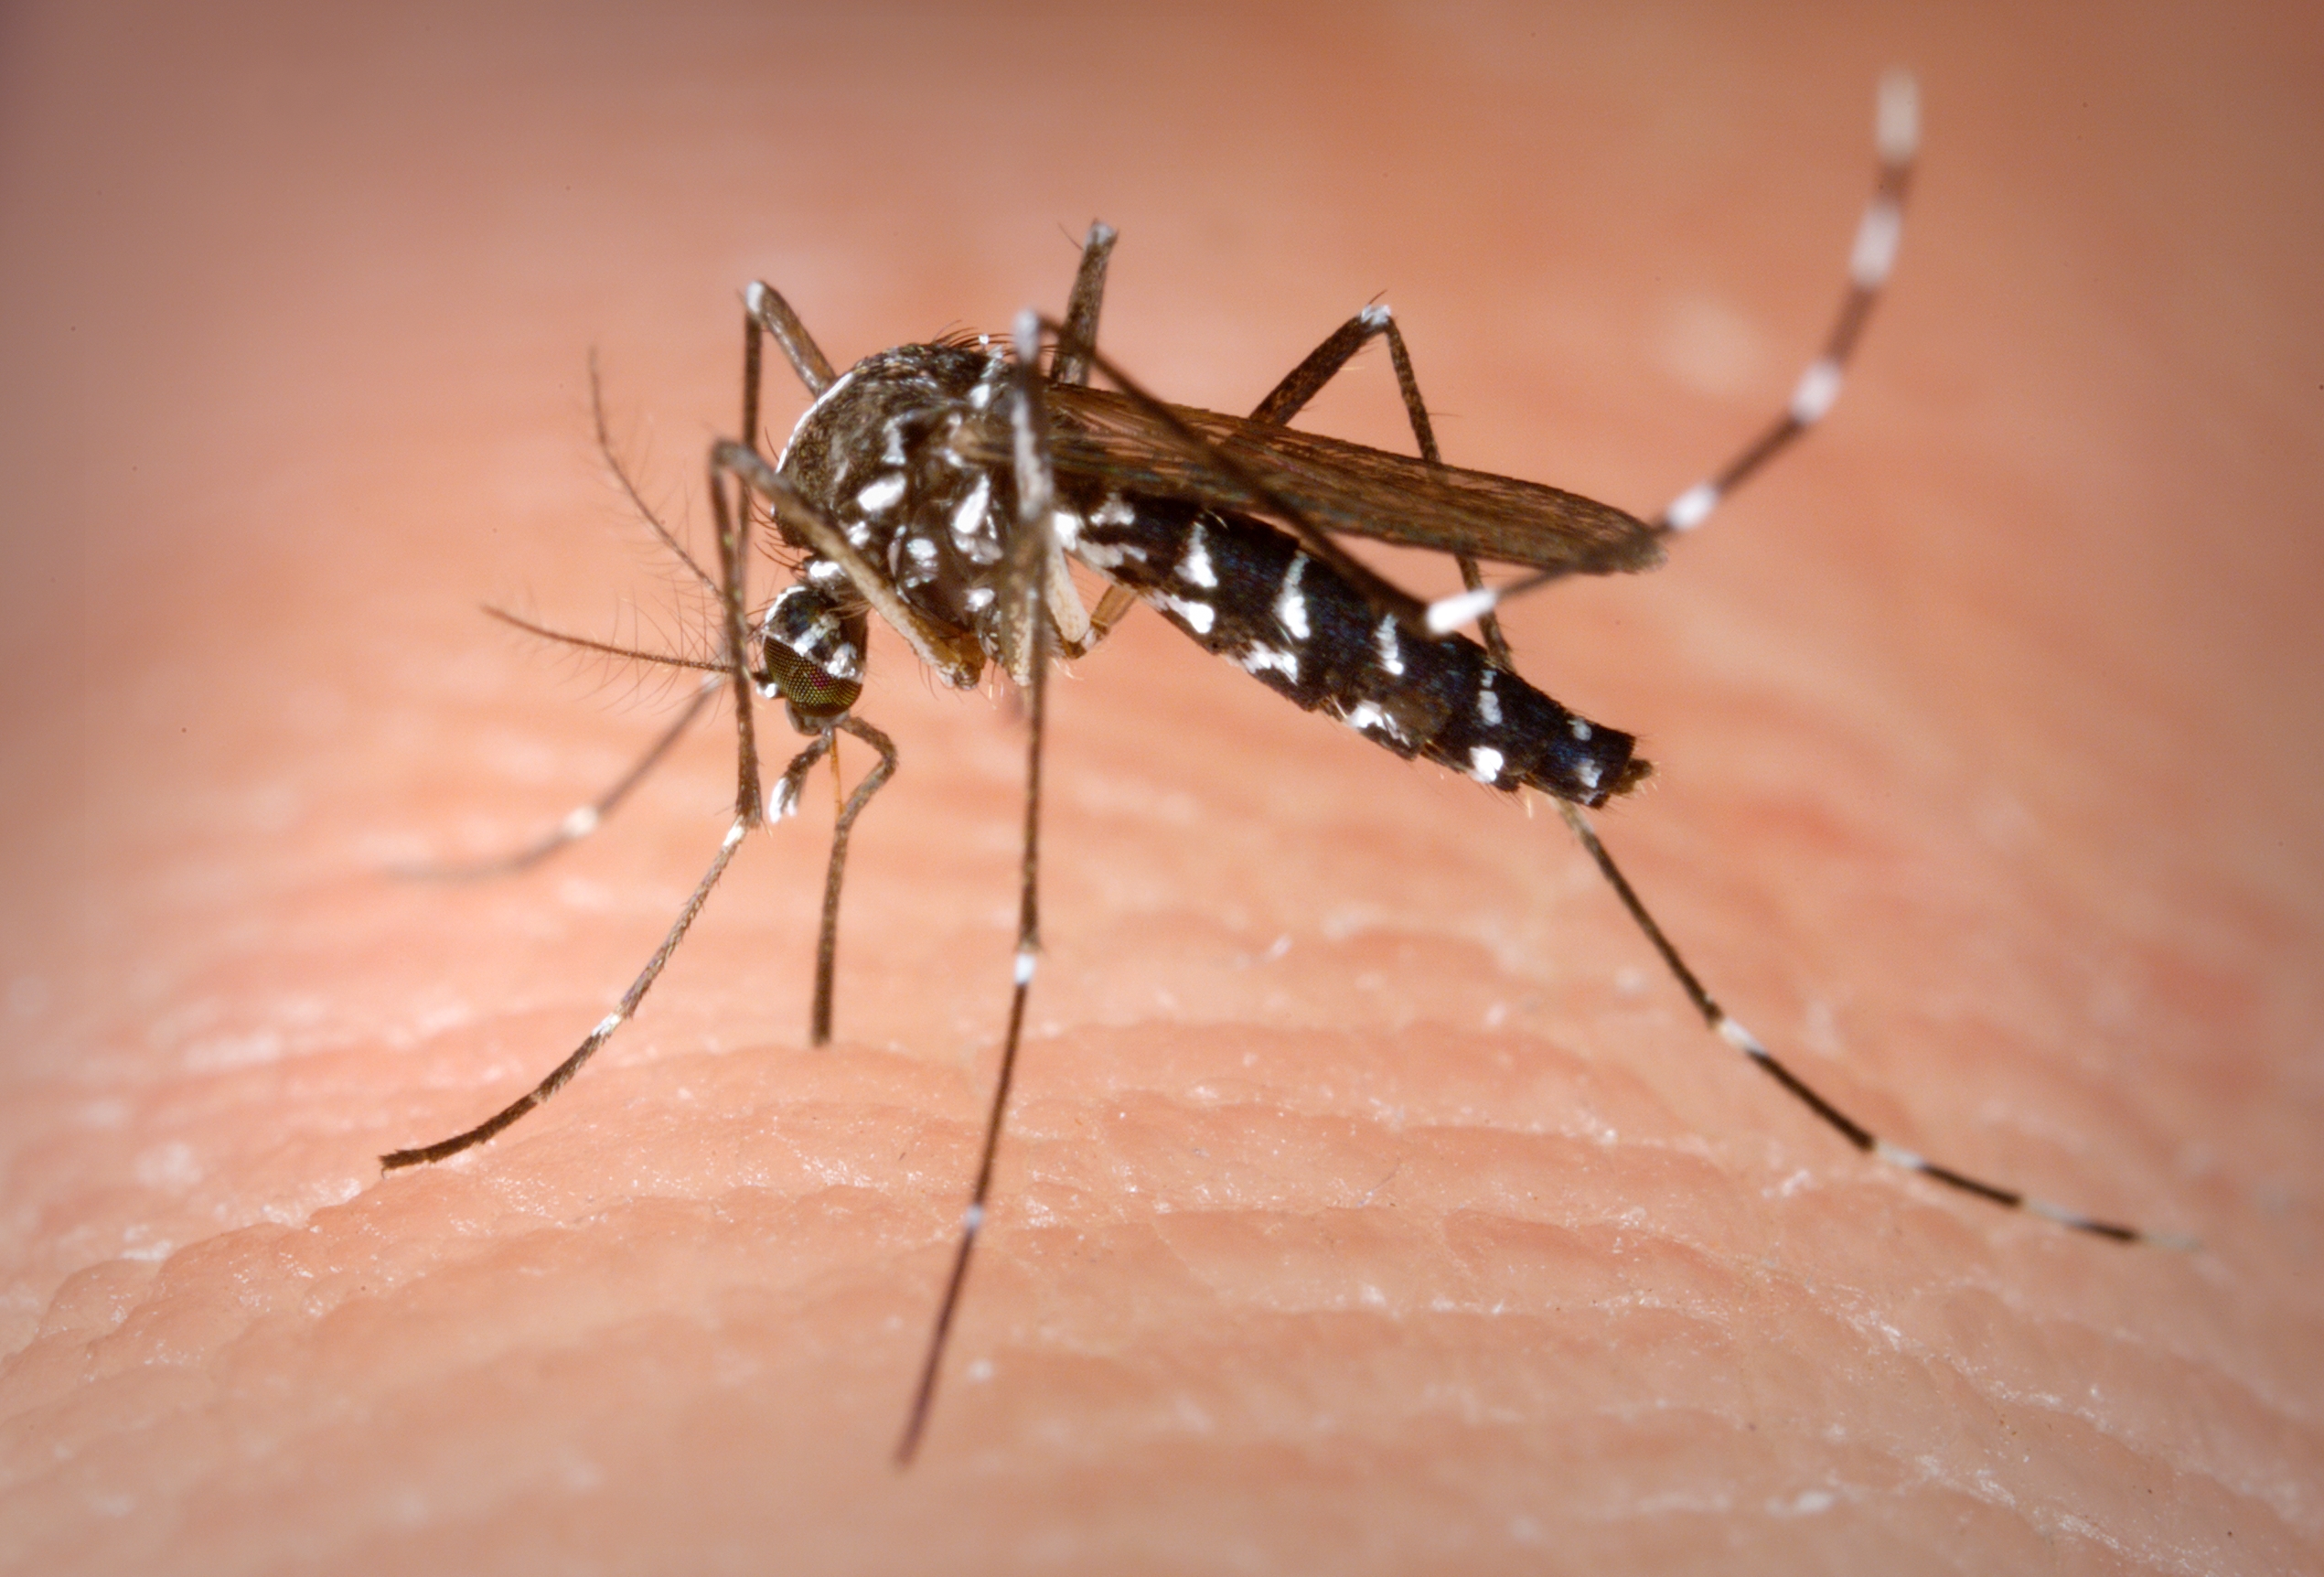 Scientists succeed in wiping out population of Malaria mosquitoes in lab trials